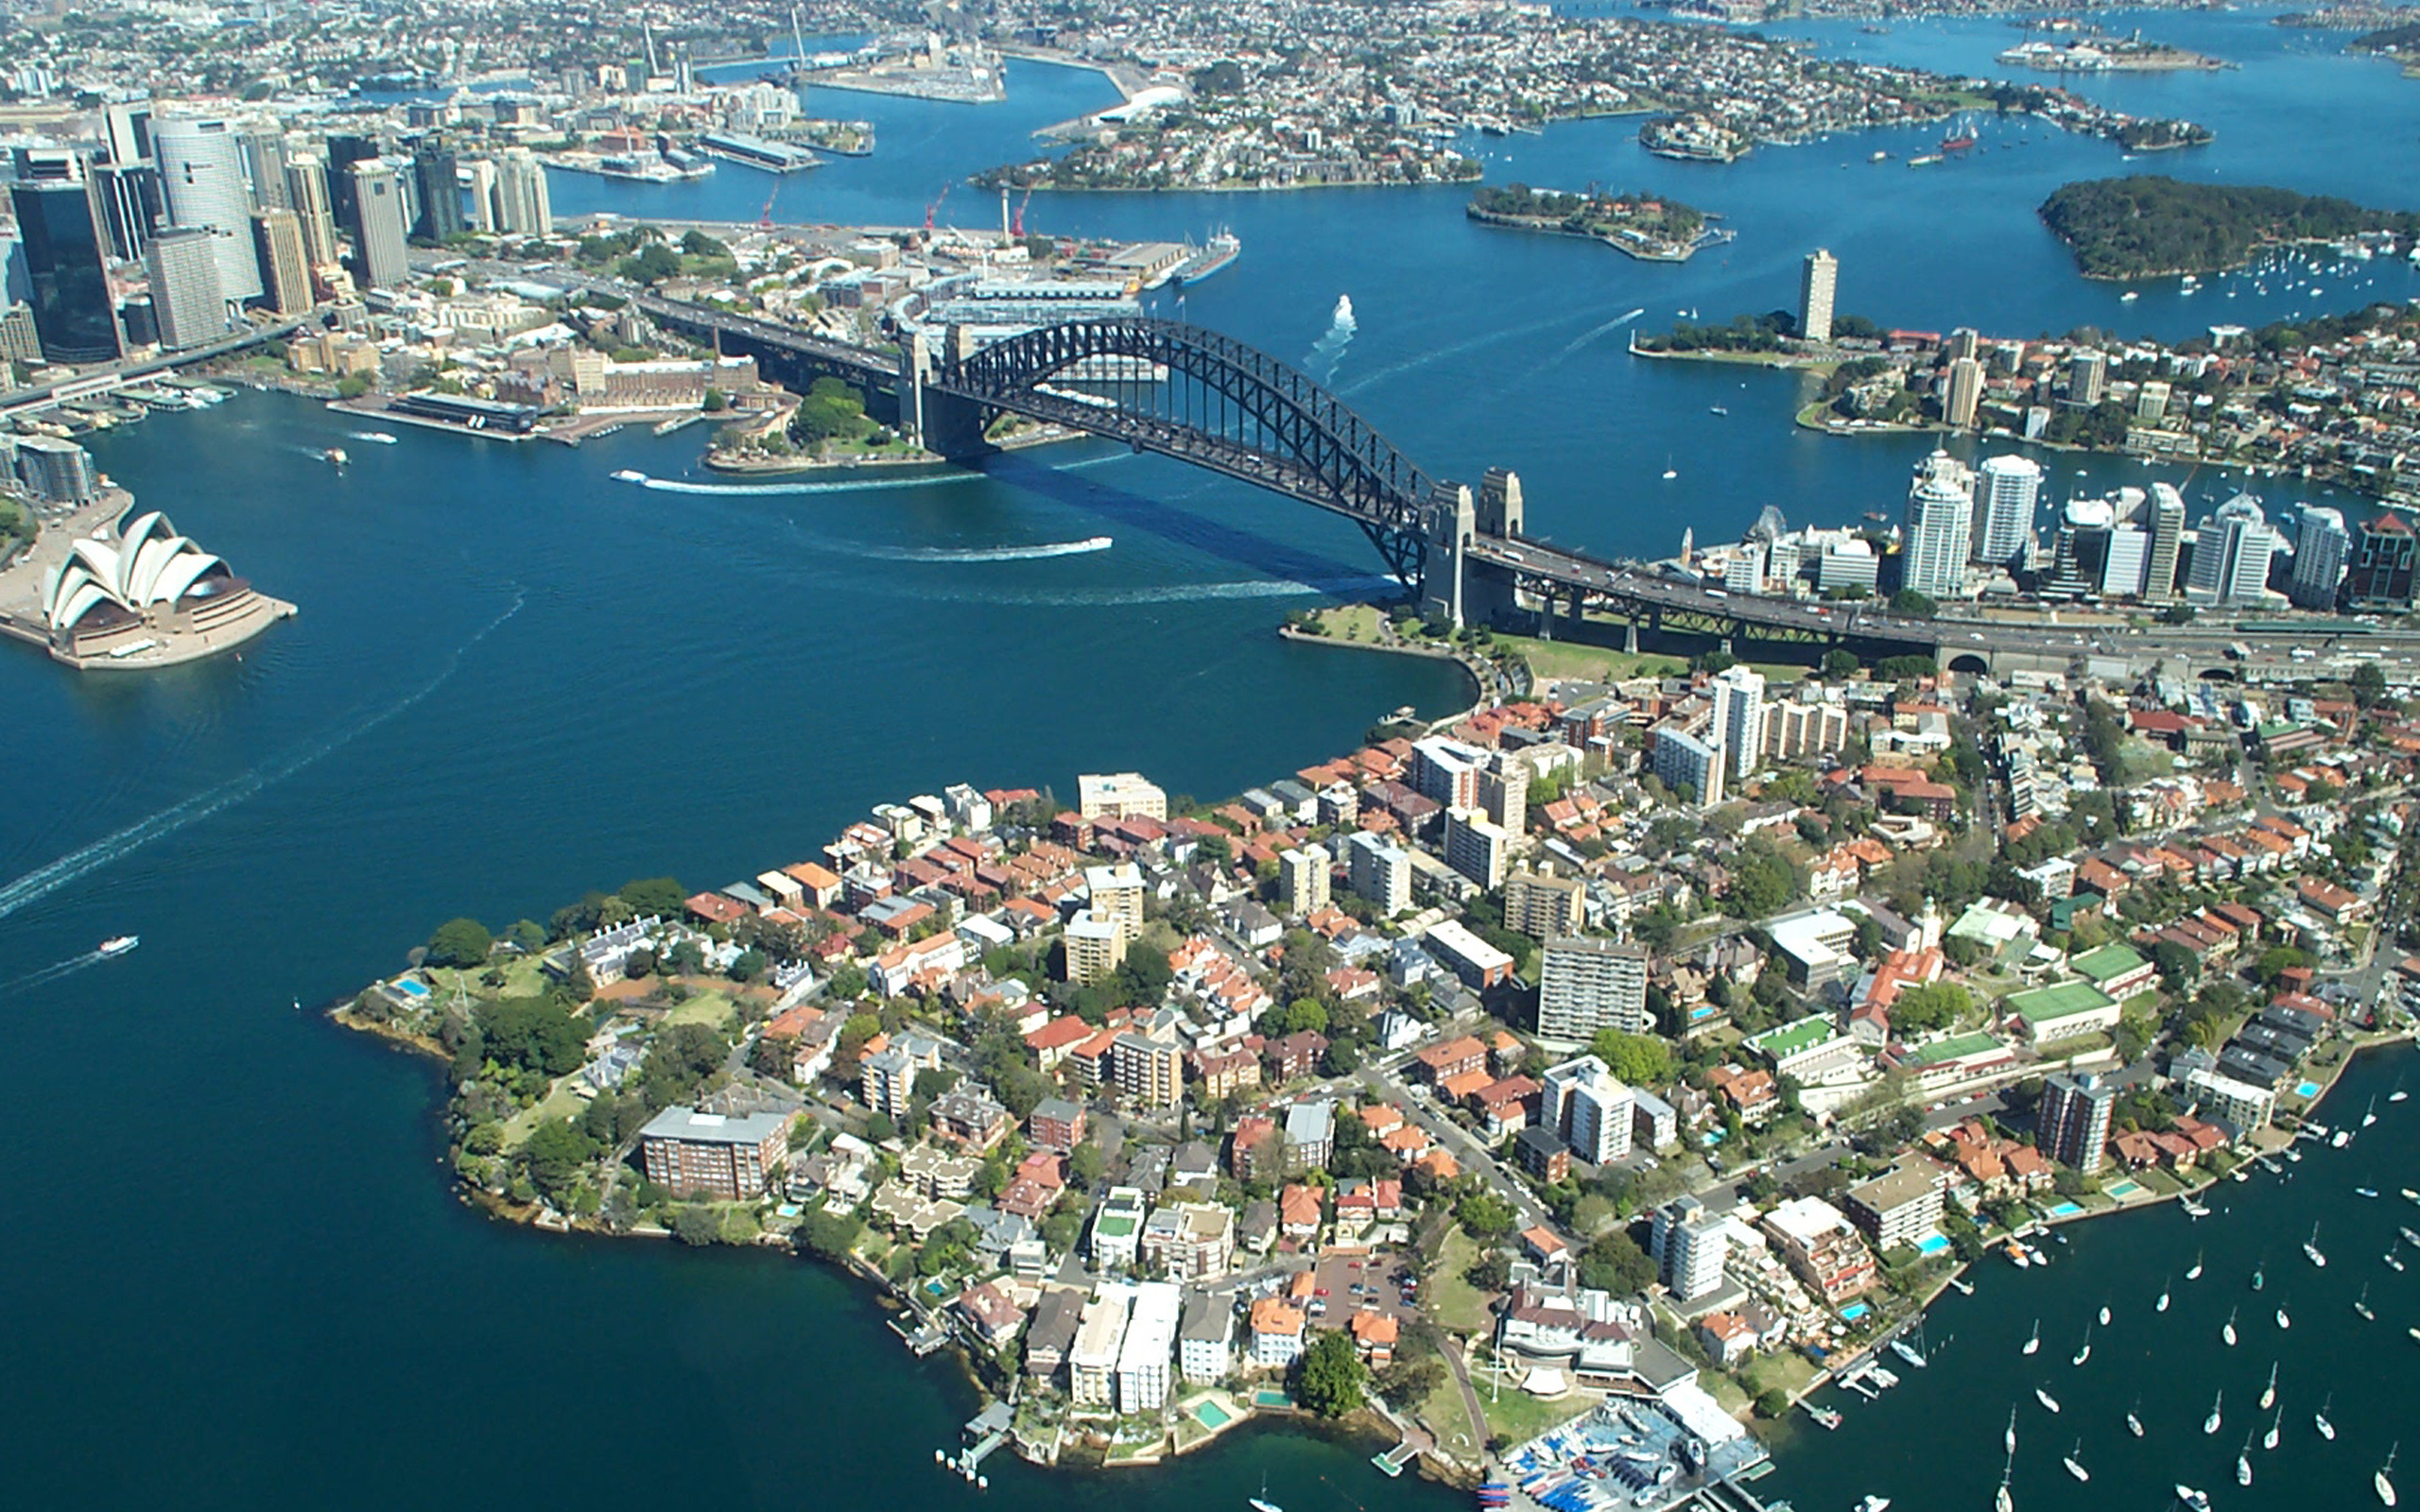 Sydney: The site of the University of New South Wales and Macquarie University. 2560x1600 HD Wallpaper.